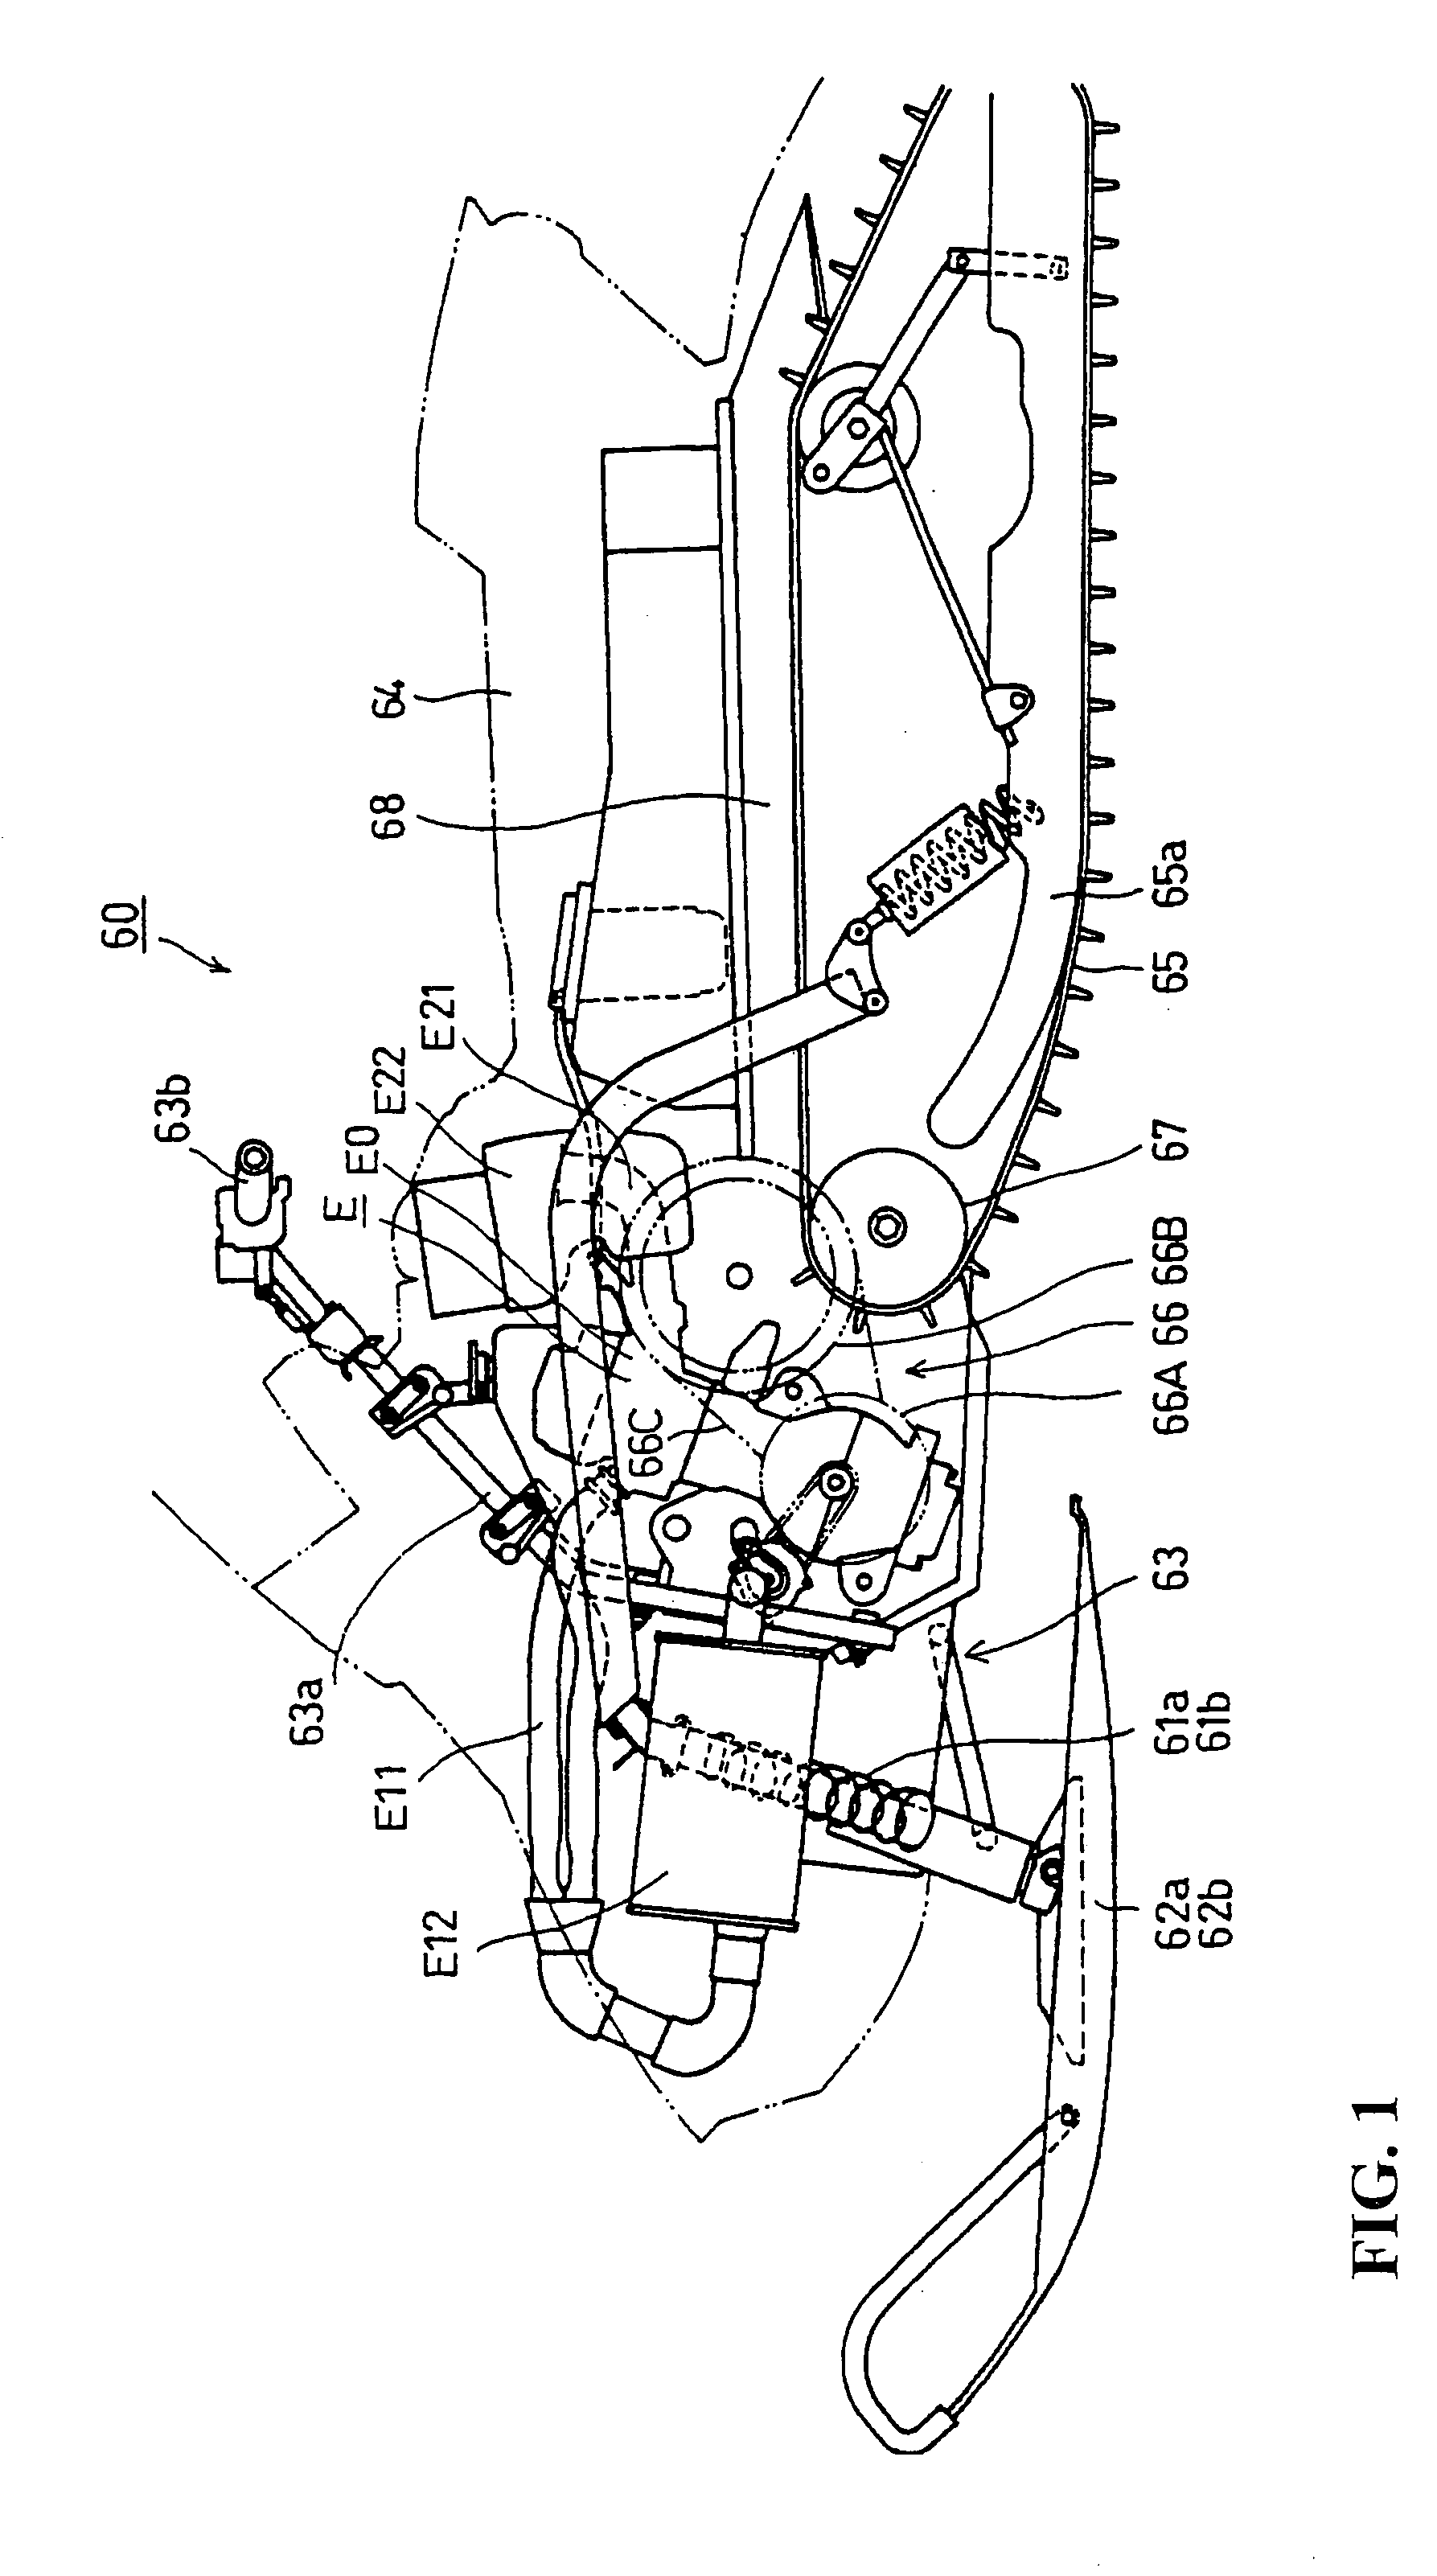 Valve train lubricating structure in internal combustion engine